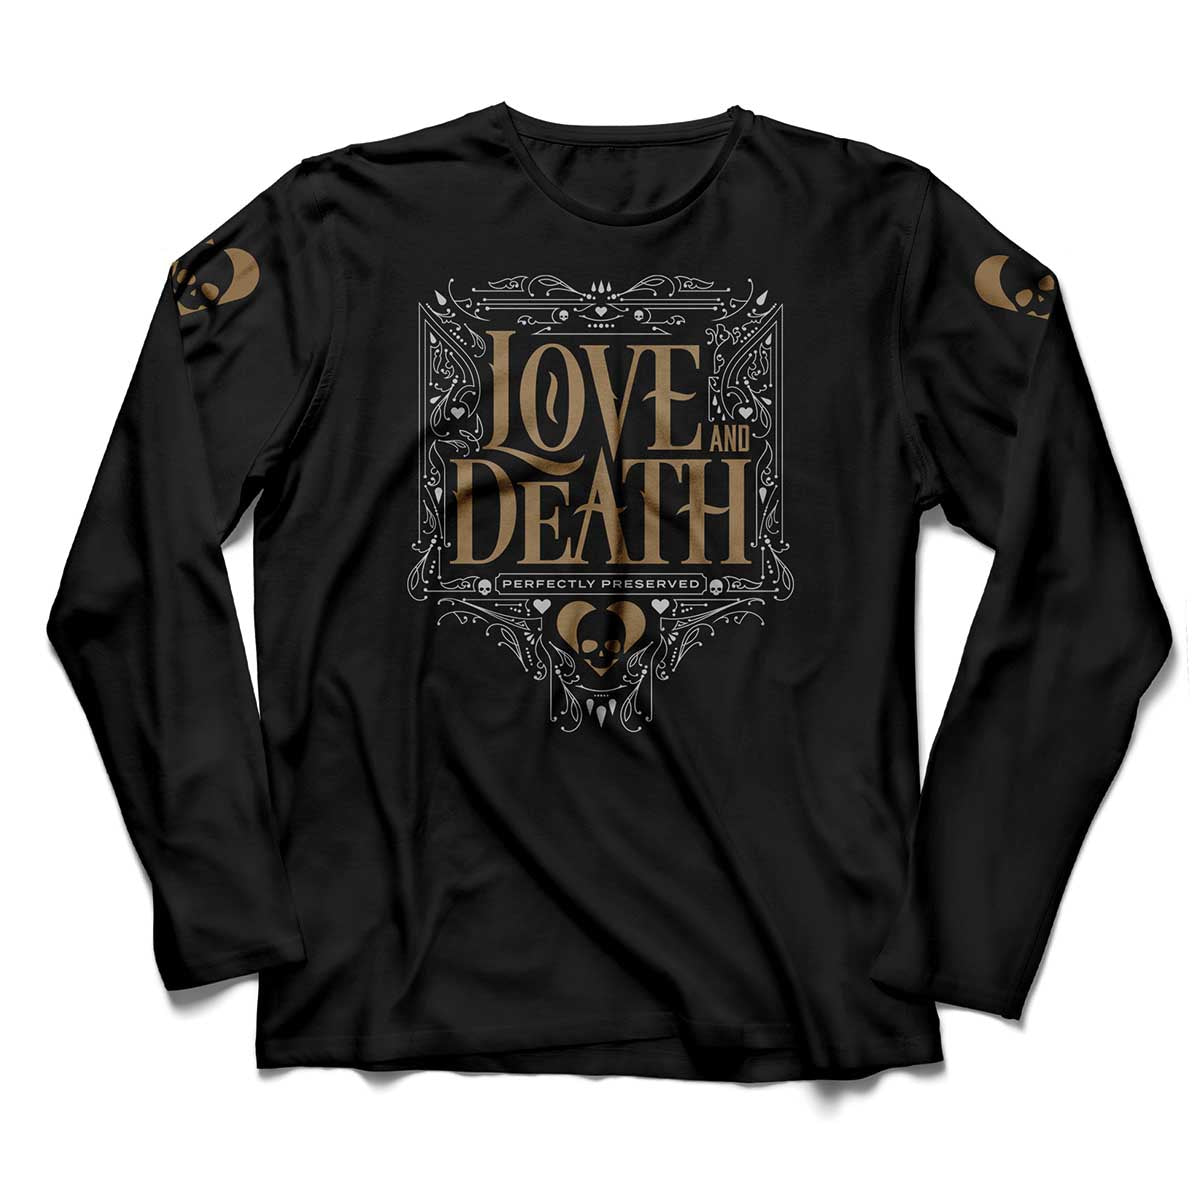 Love And Death "Perfectly Preserved" Long Sleeve T shirt